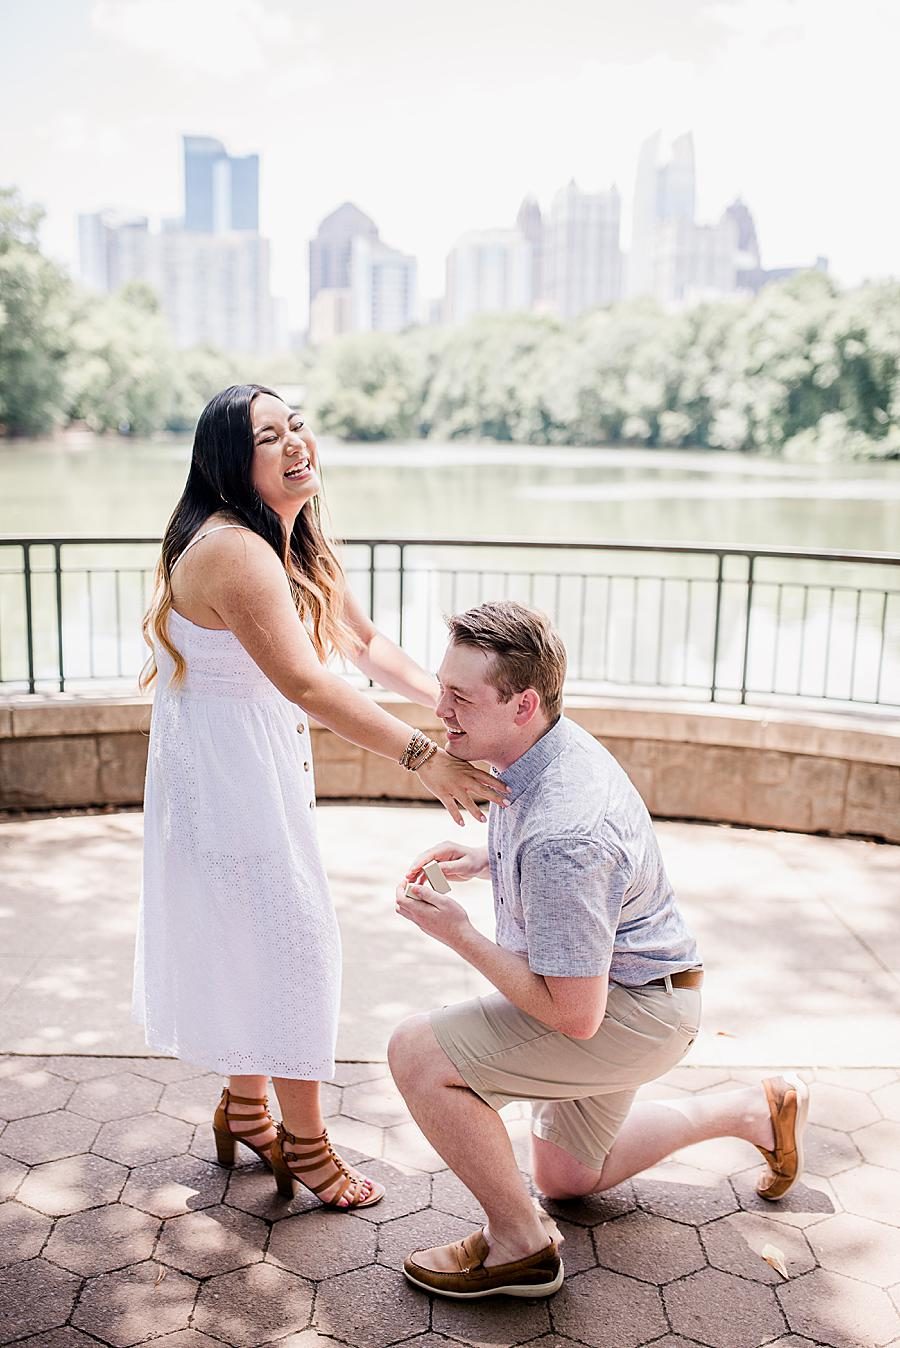 Just engaged at this Piedmont Park Proposal by Knoxville Wedding Photographer, Amanda May Photos.